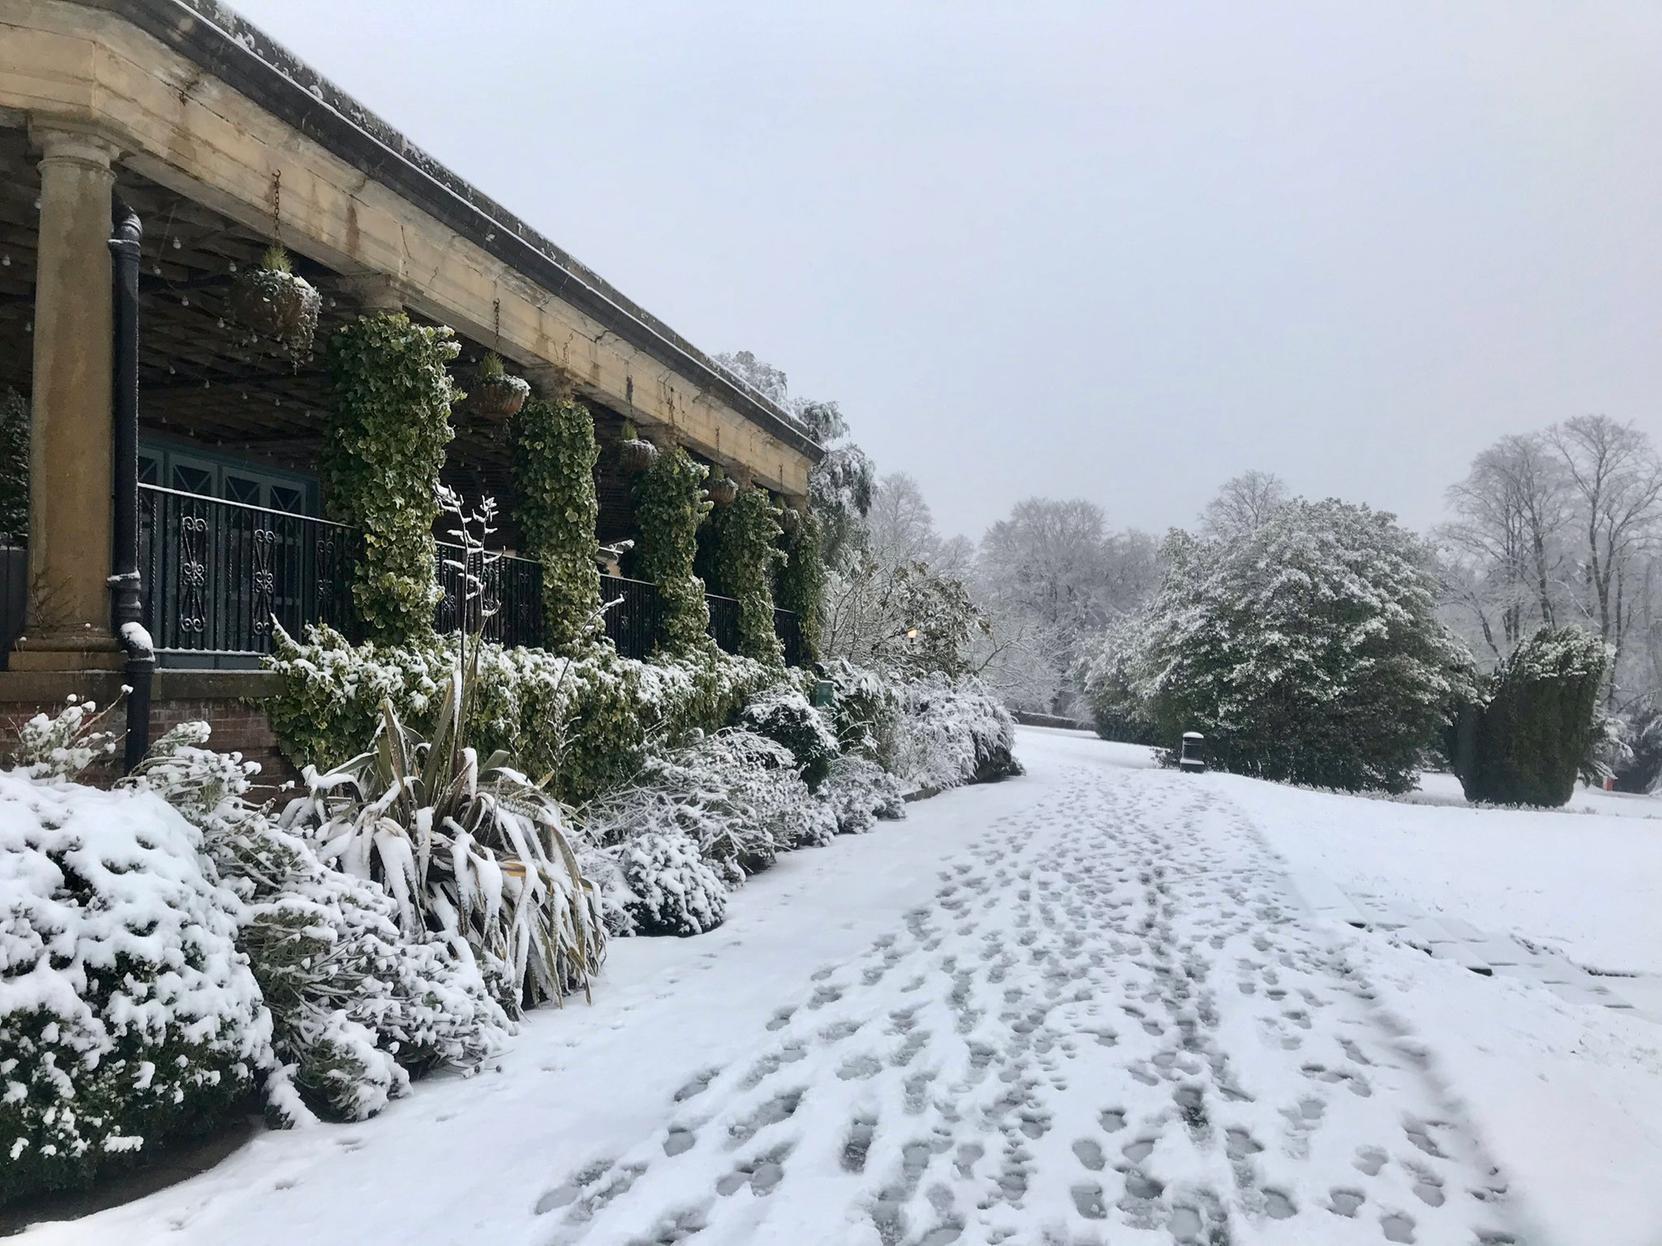 A wintry scene at Valley Gardens this morning.